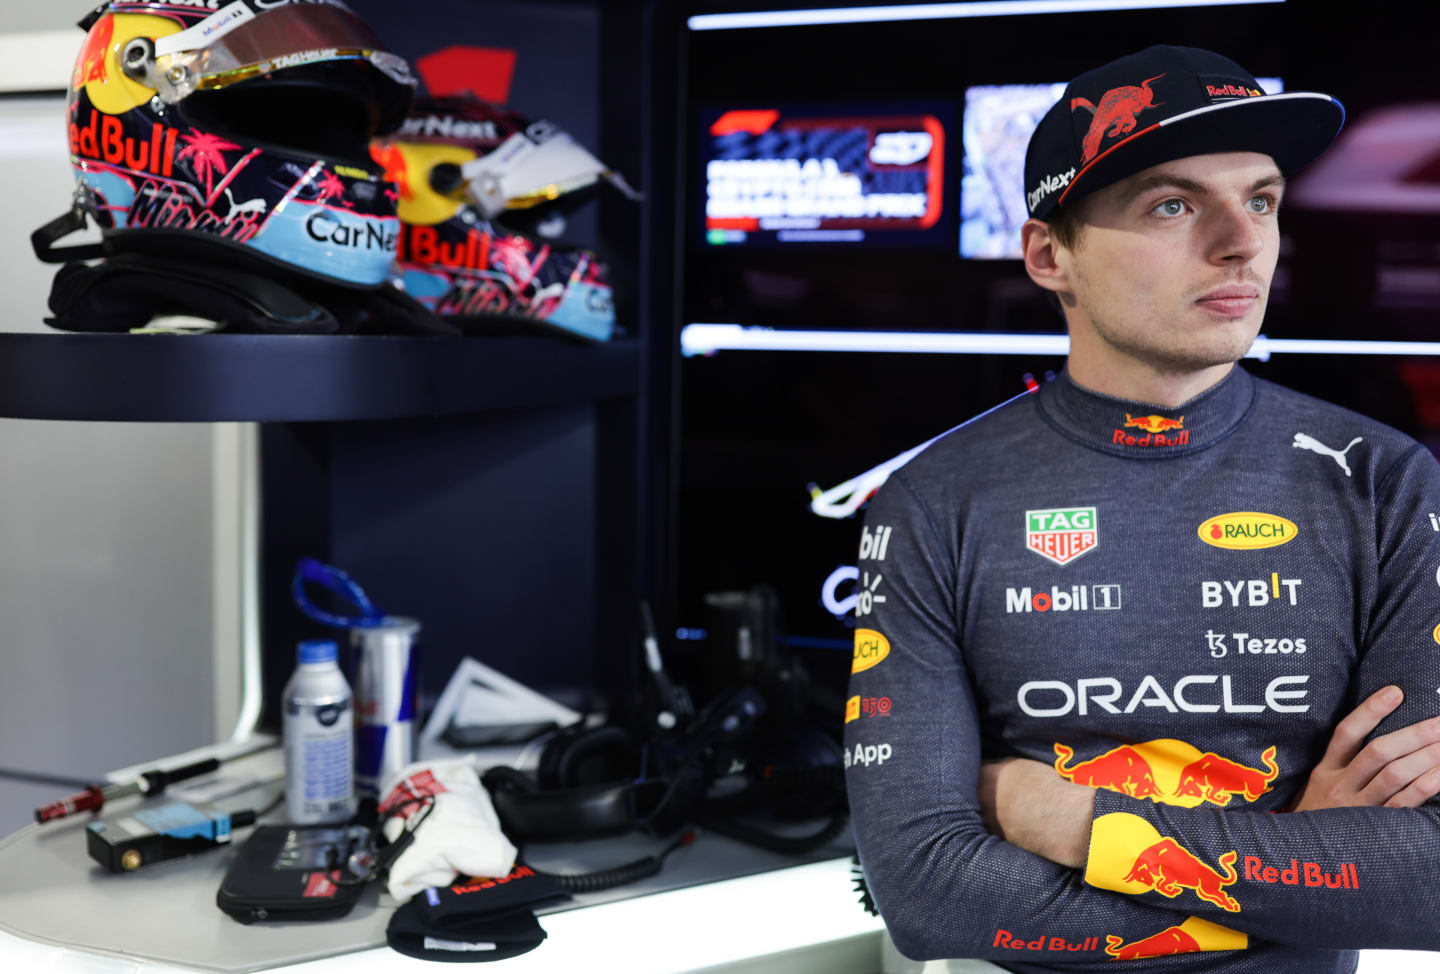 MIAMI, FLORIDA - MAY 07: Max Verstappen of the Netherlands and Oracle Red Bull Racing looks on in the garage during qualifying ahead of the F1 Grand Prix of Miami at the Miami International Autodrome on May 07, 2022 in Miami, Florida. (Photo by Mark Thompson/Getty Images)